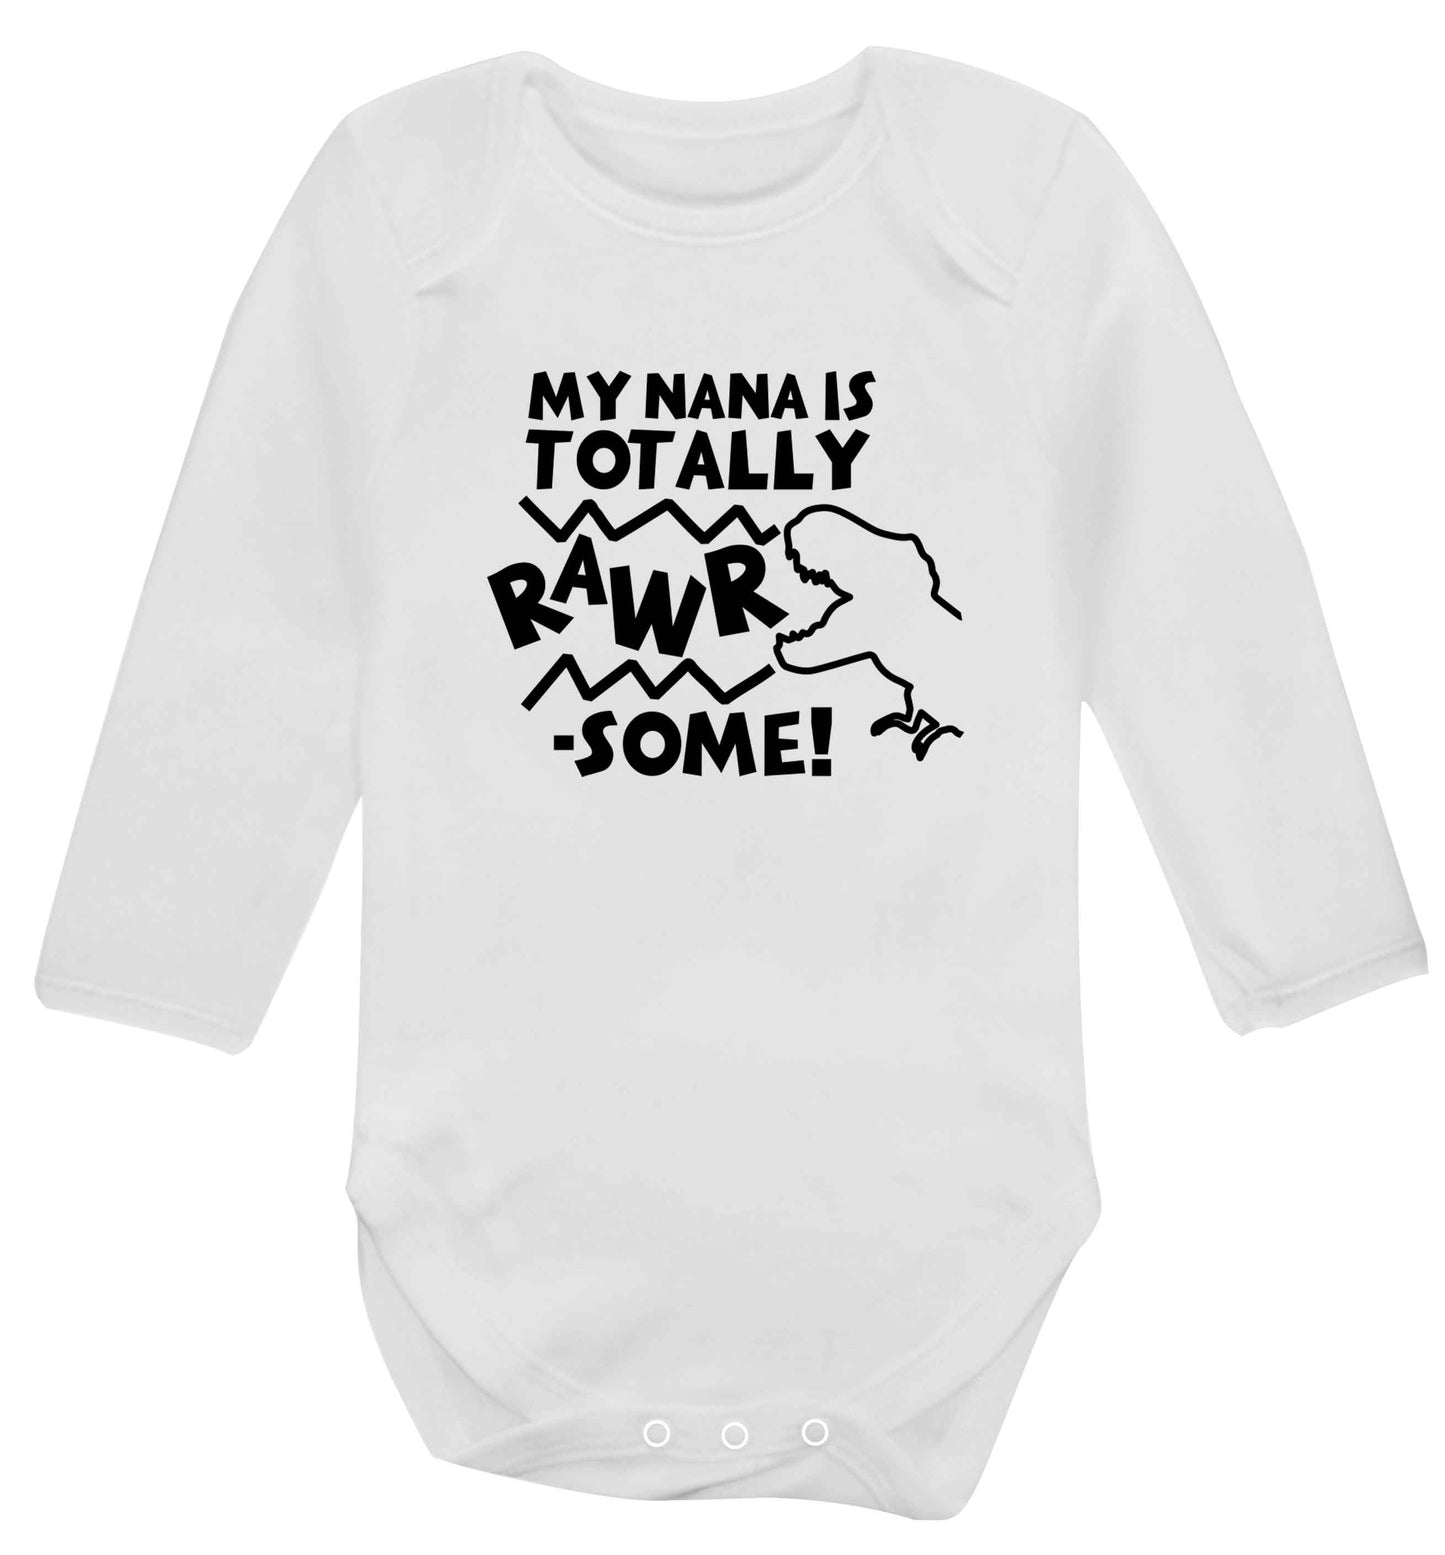 My nana is totally rawrsome baby vest long sleeved white 6-12 months